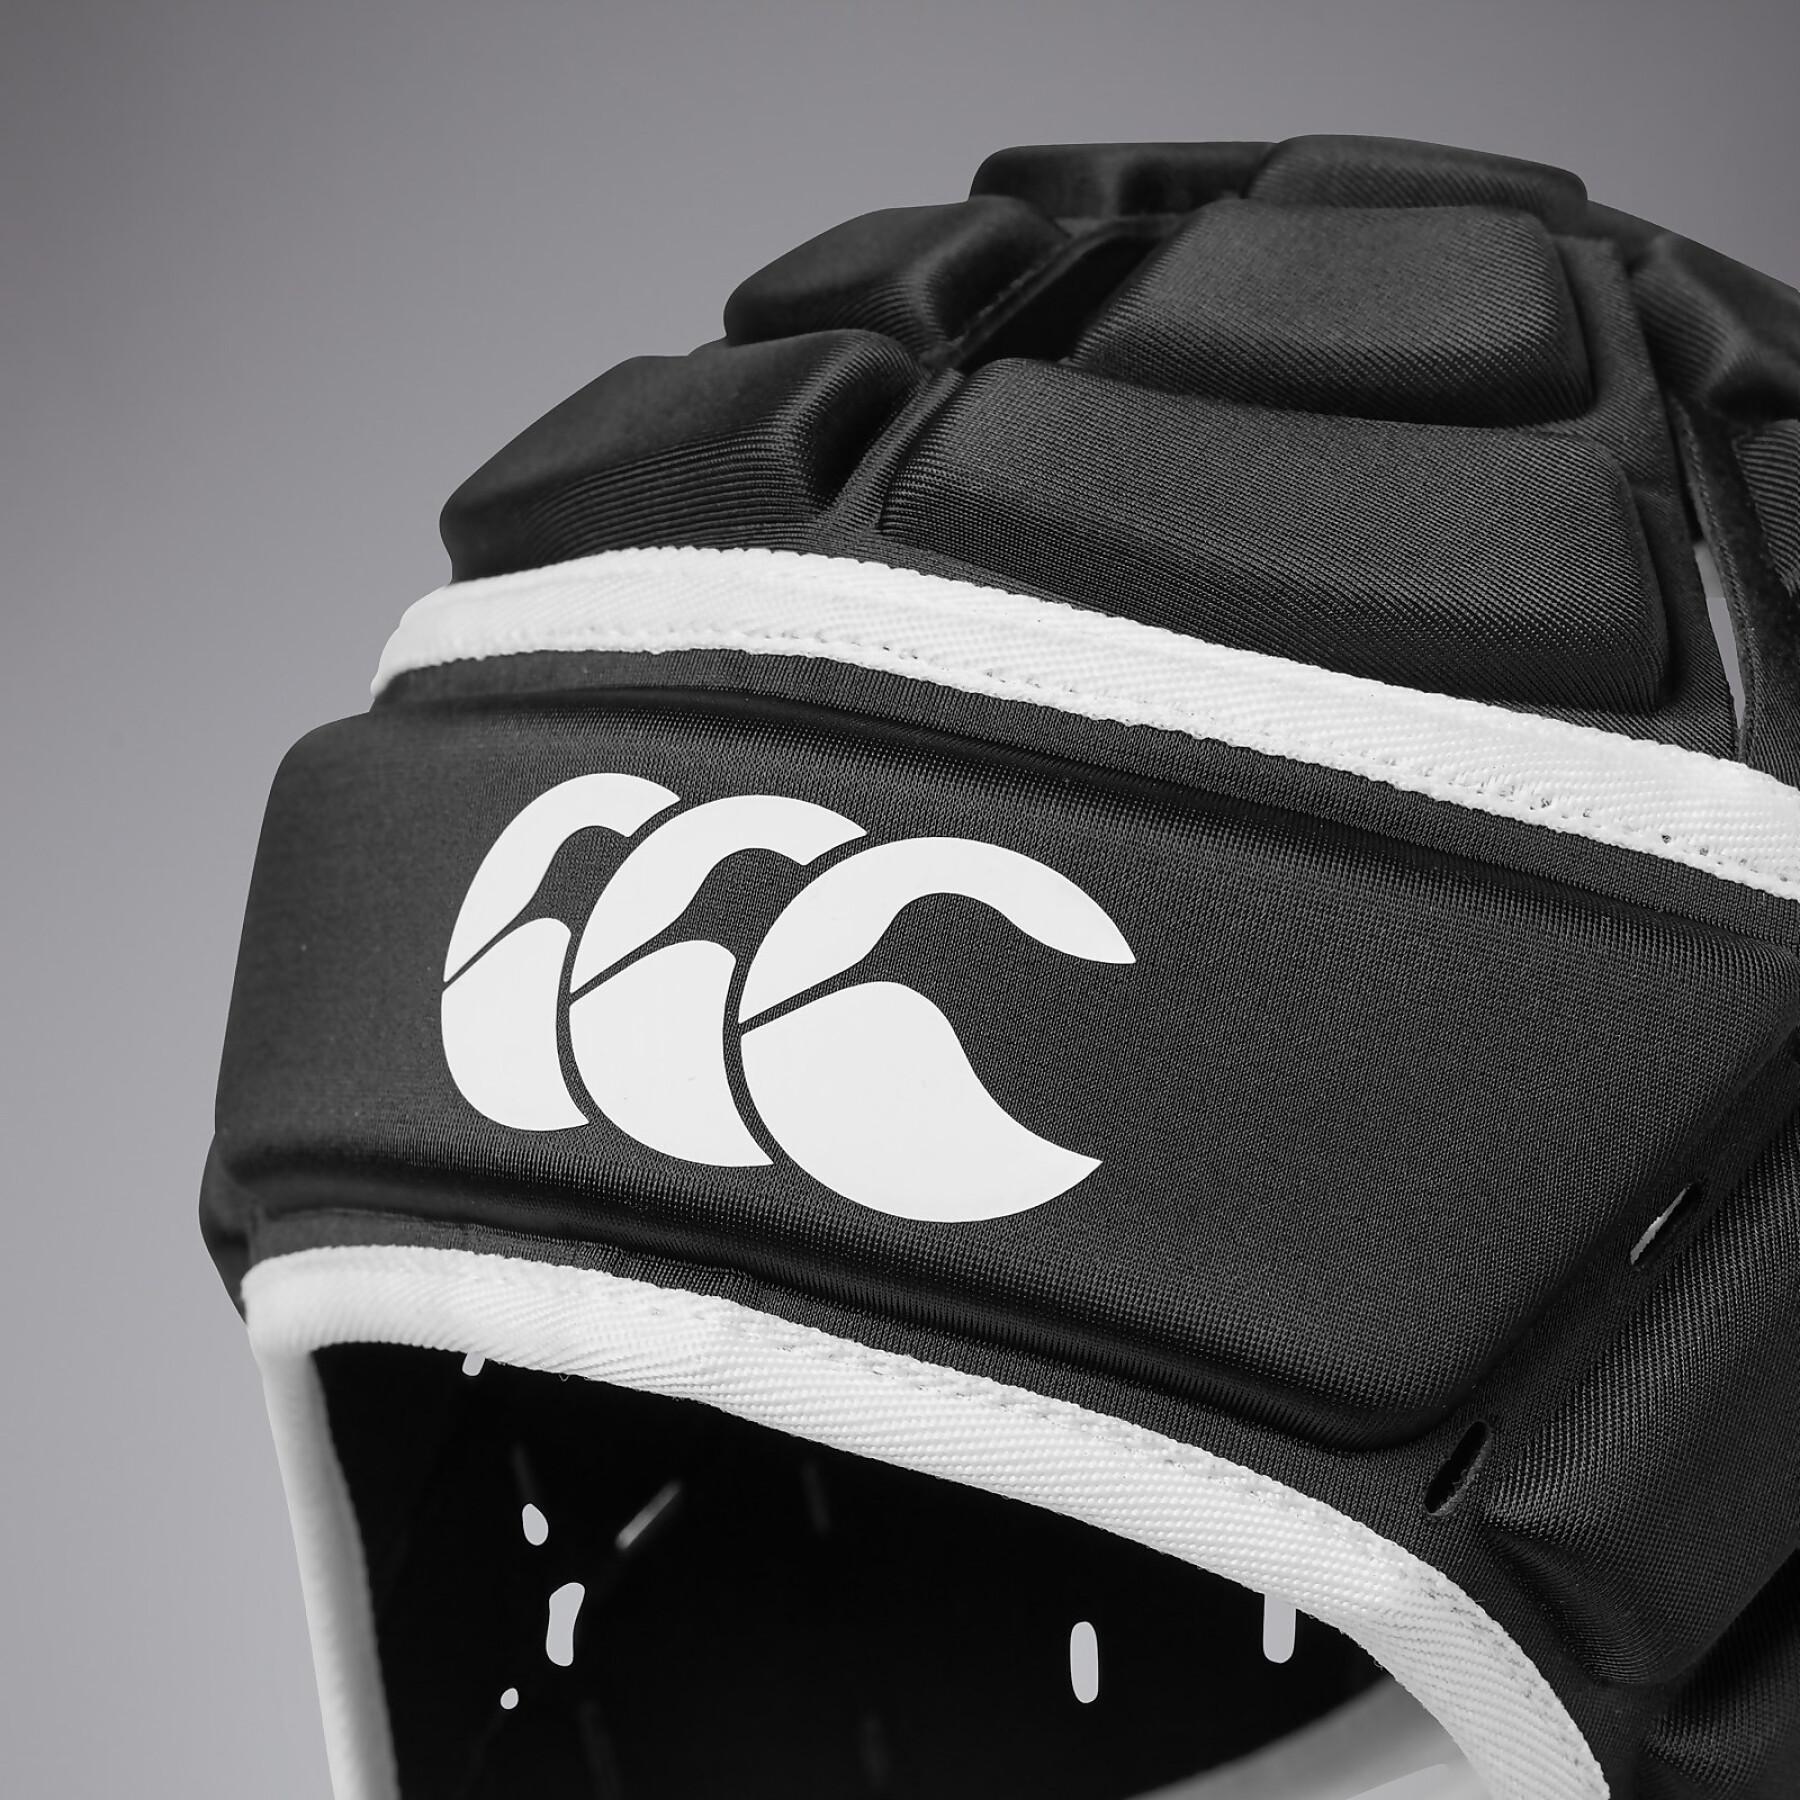 Rugby-Helm Canterbury Core